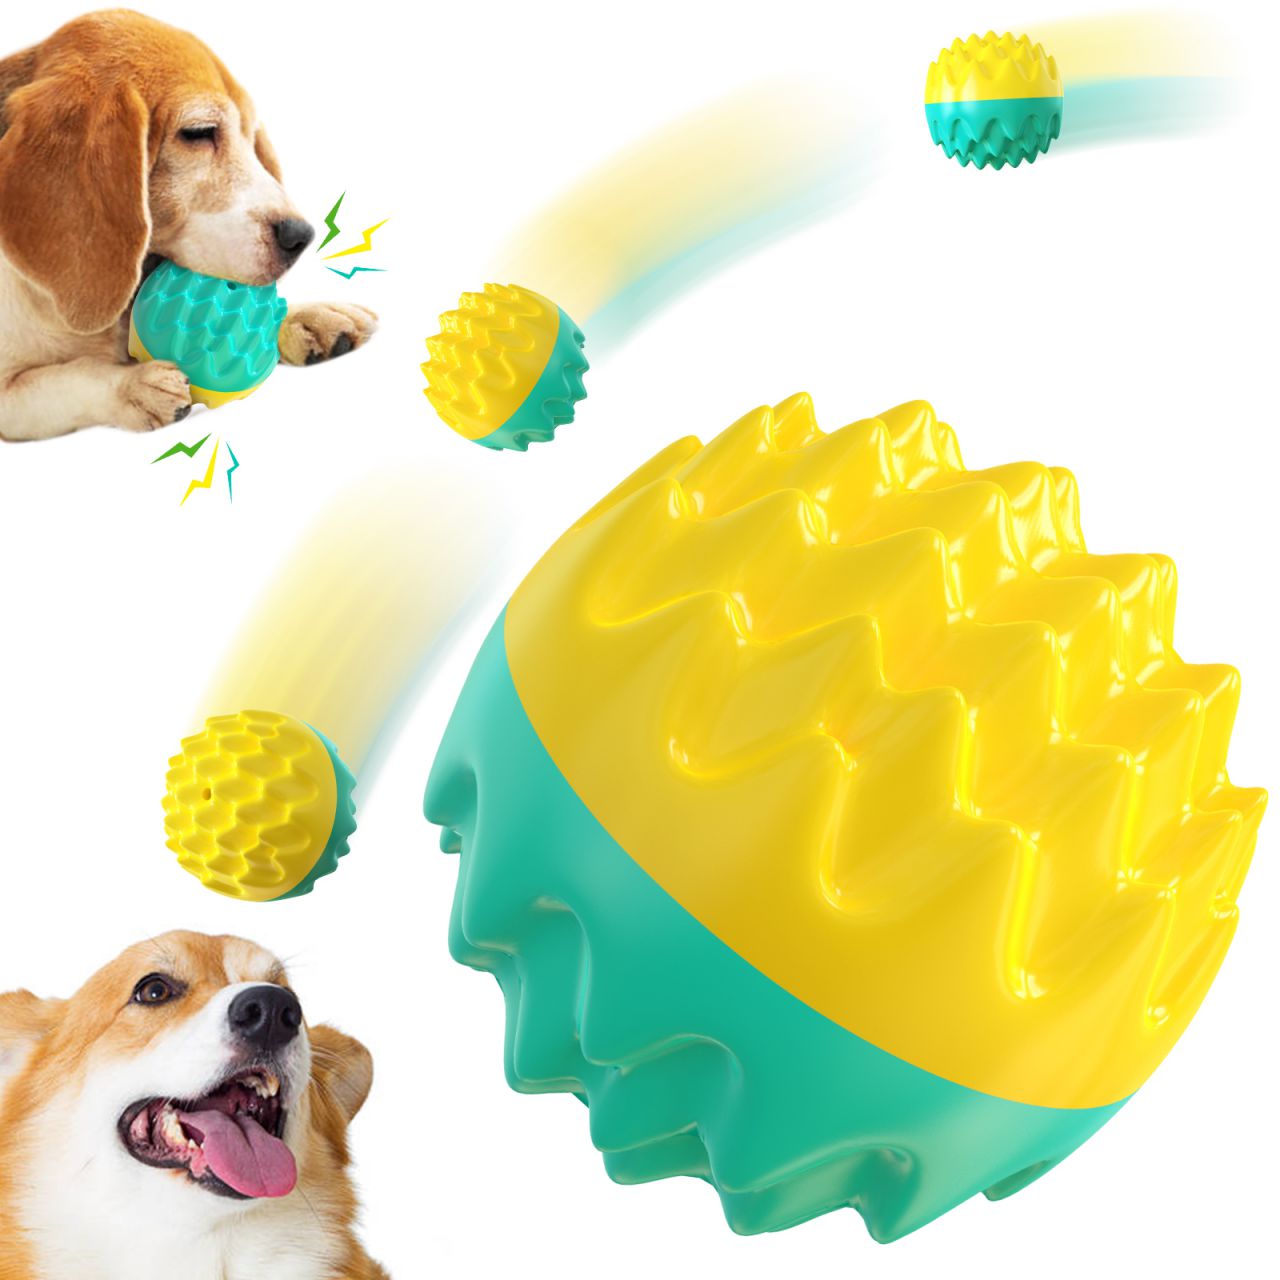 Dog Toys Chew Training Ball Bouncy Ball Interactive Sound Toy Multifunctional Pet Dog Toy